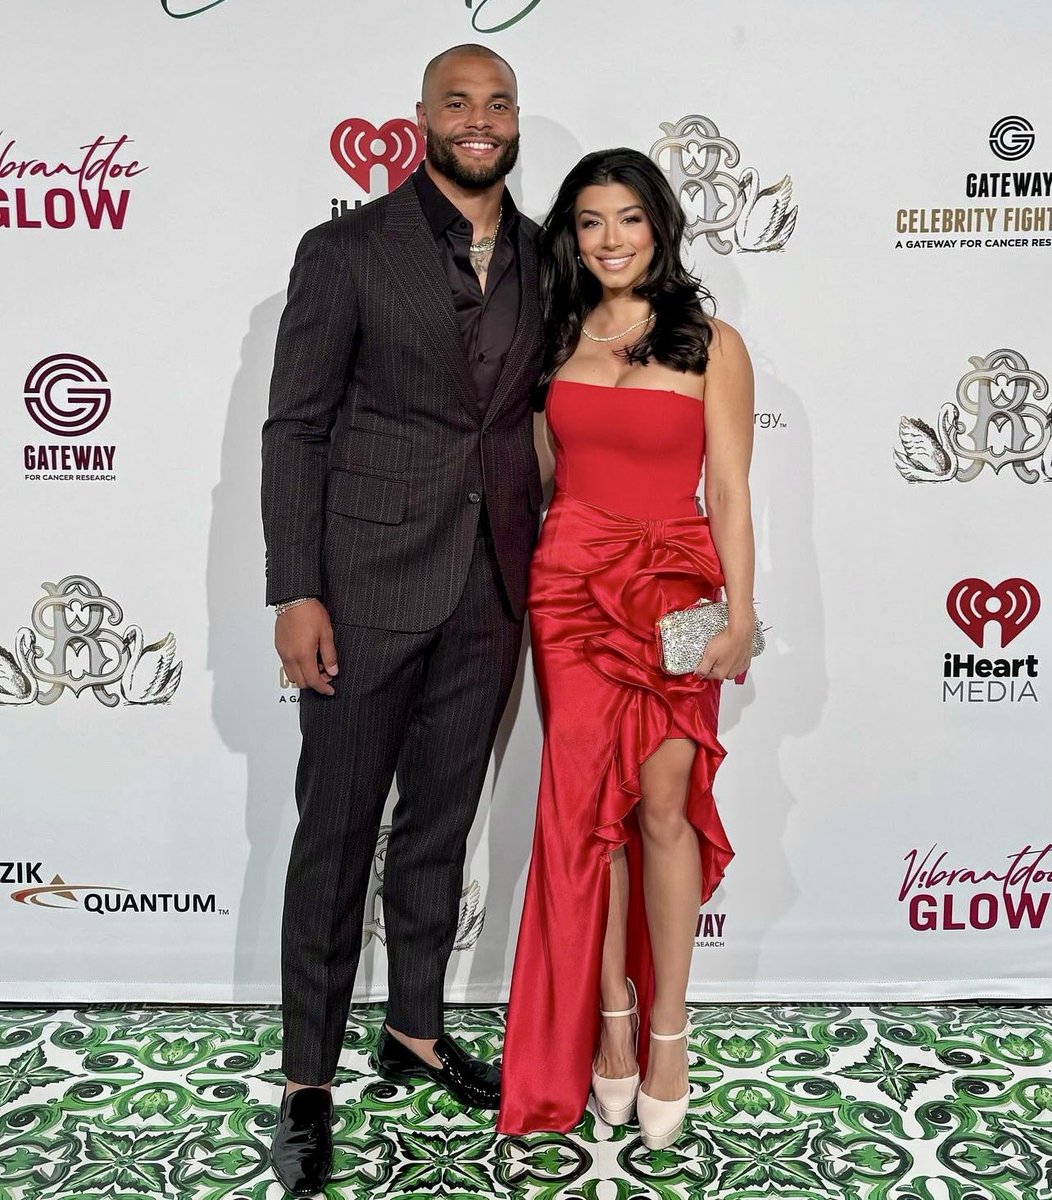 Dak Prescott suited up by yours truly alongside his beautiful girlfriend Sarah Jane at this weekend’s @CelebFightNight fundraiser benefitting cancer clinical trials 🙏🏼 #Cowboys